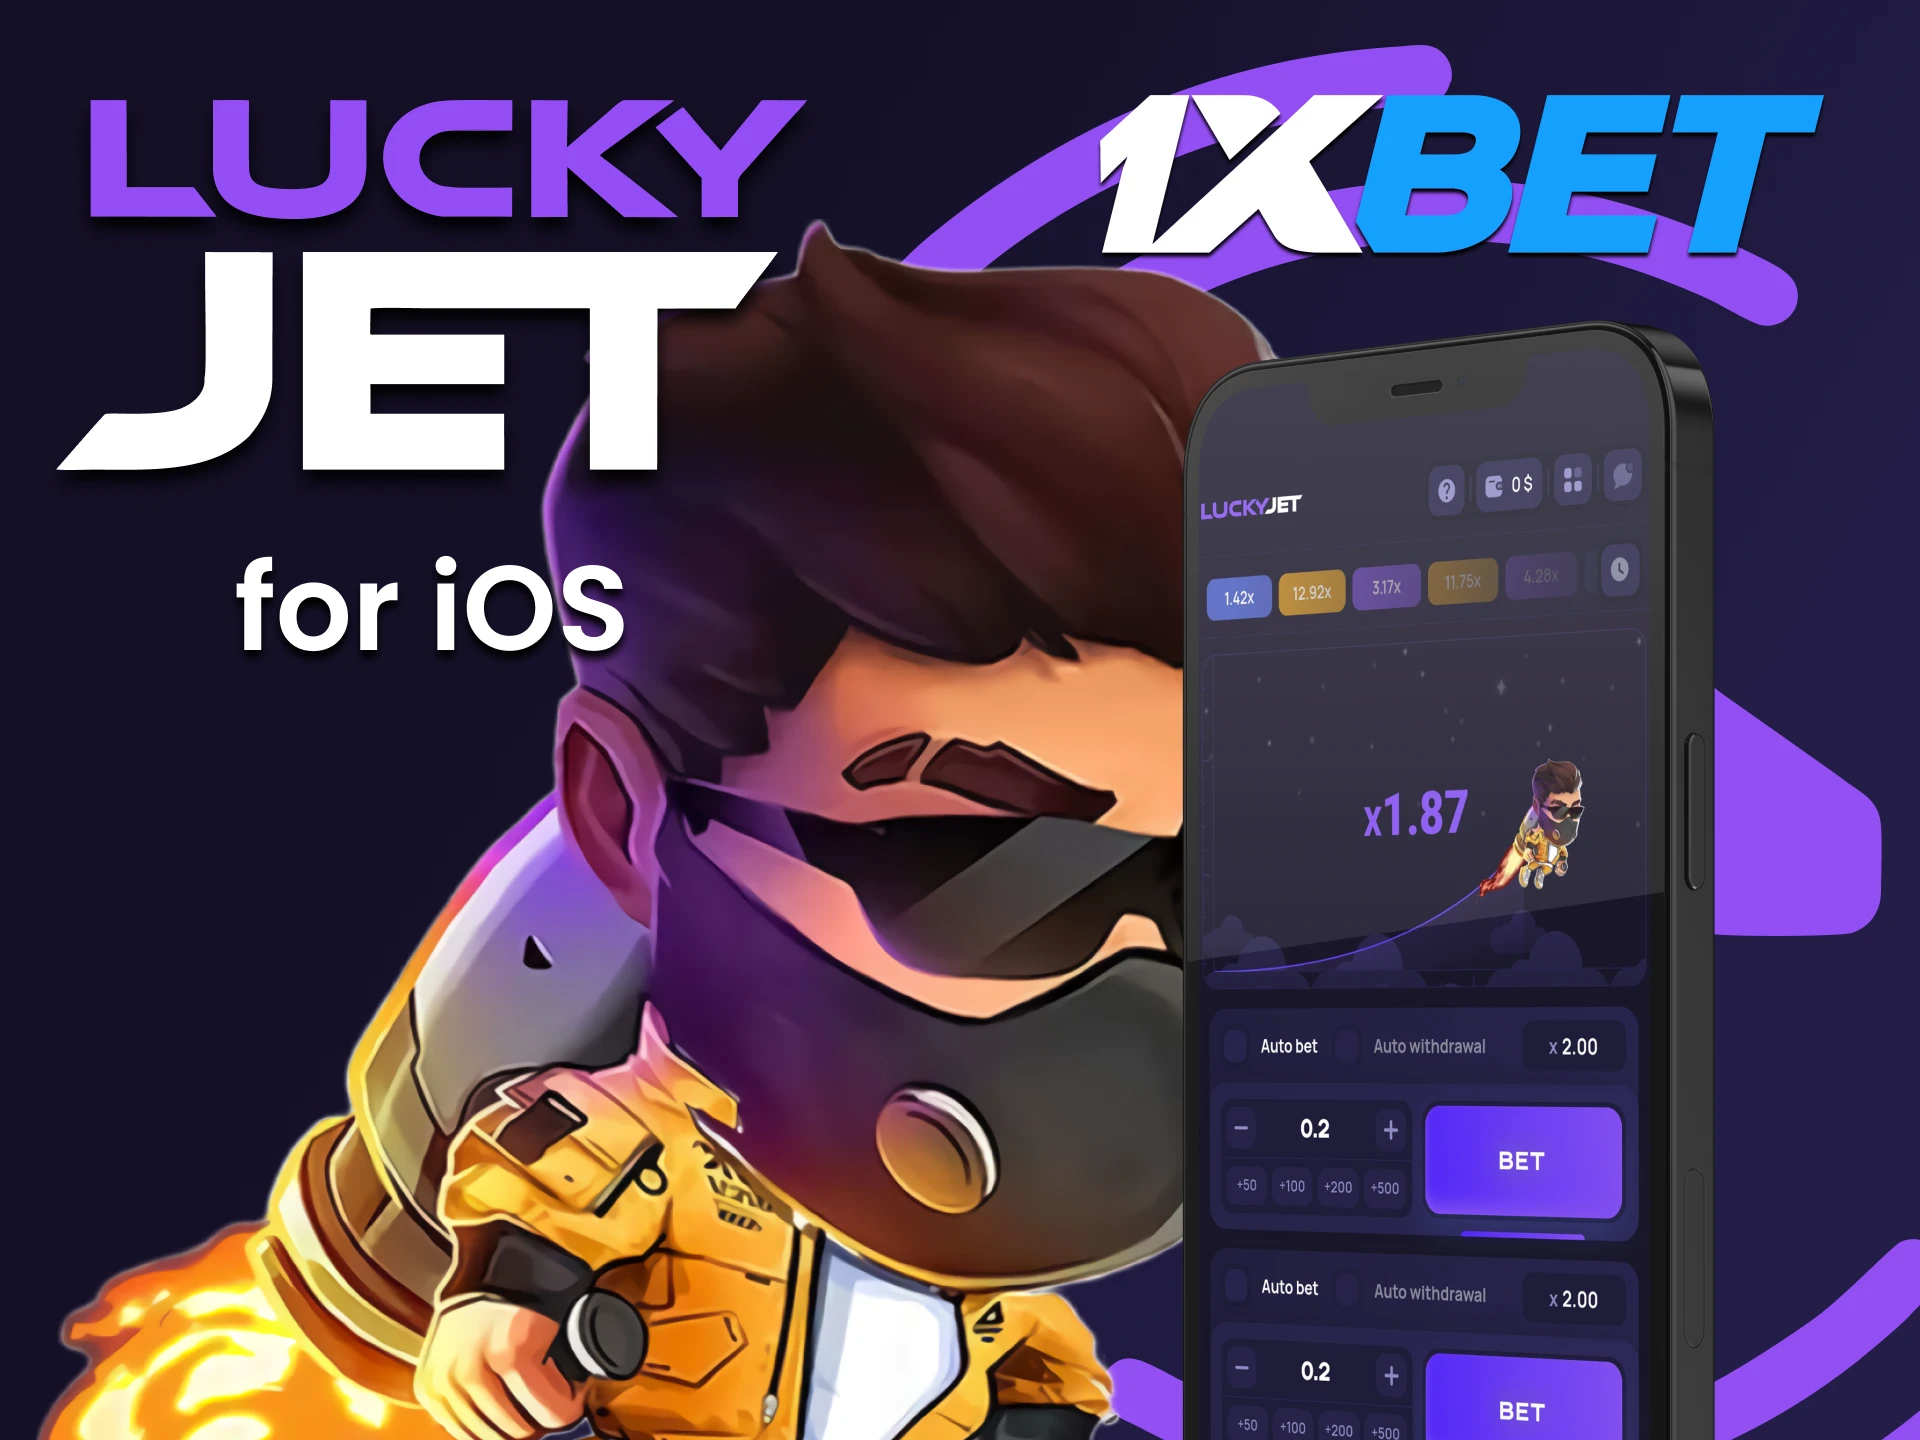 Play Lucky Jet with the 1xbet app for iOS.